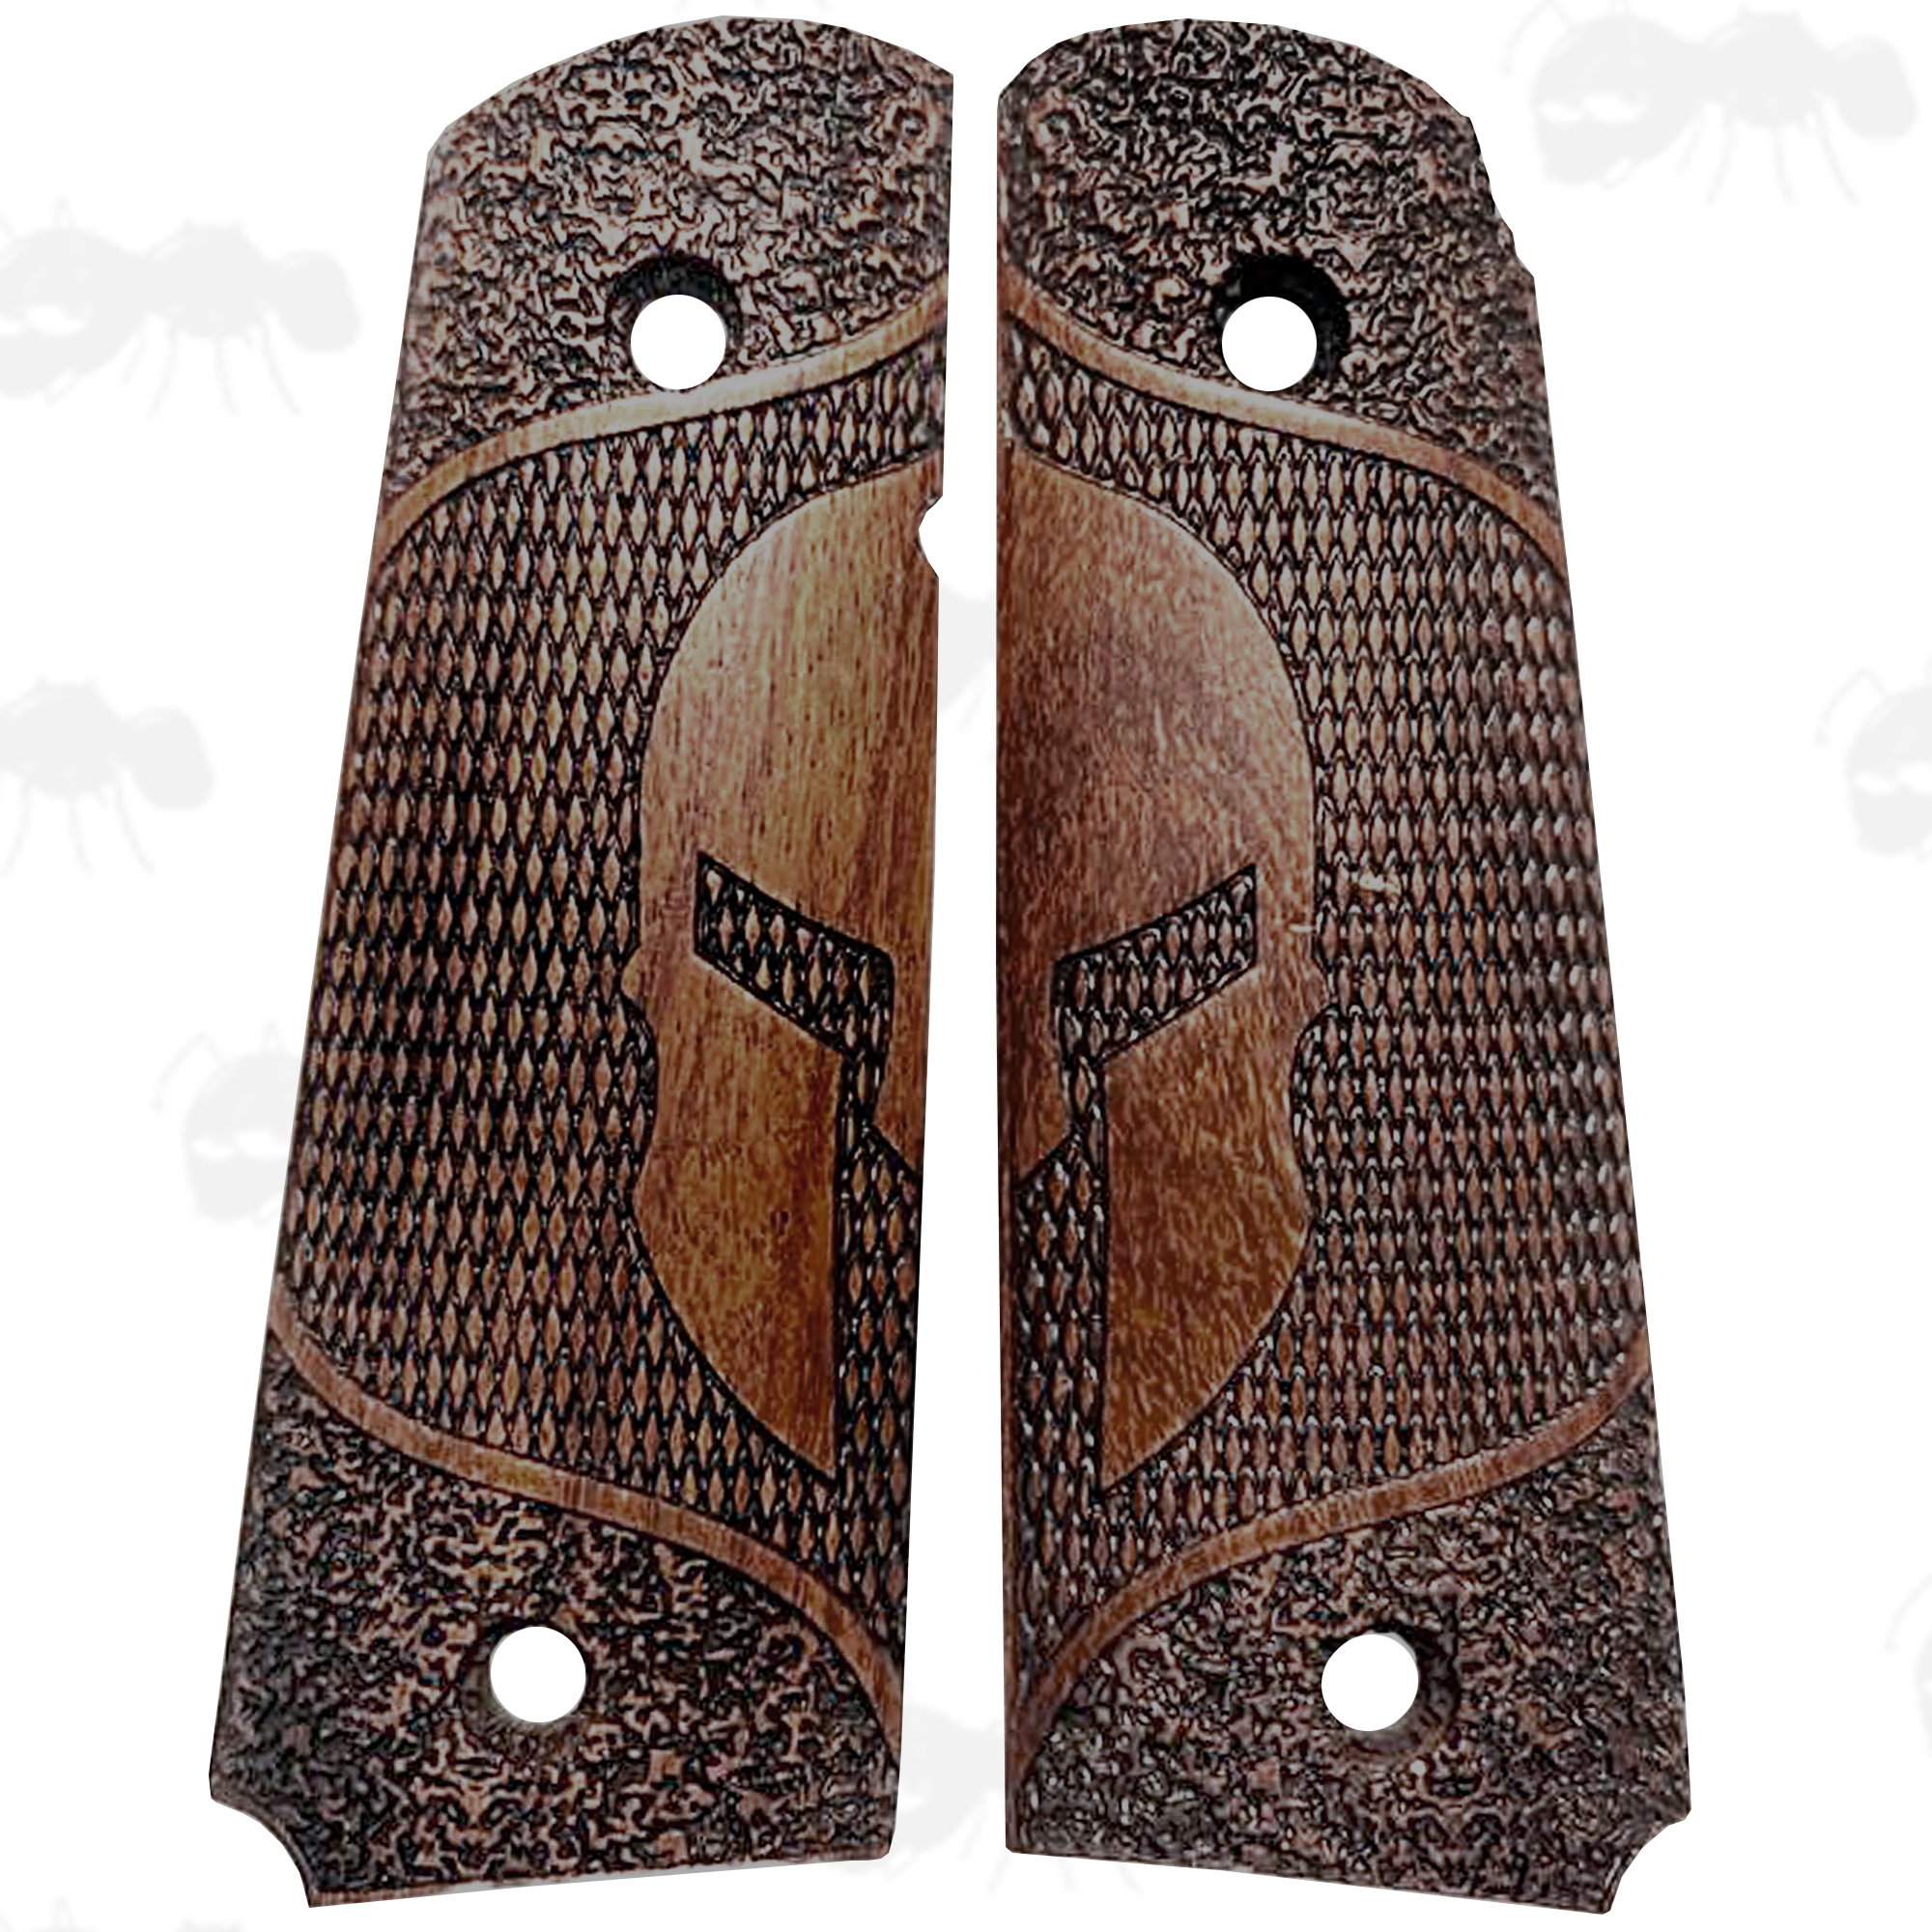 Pair of Full Size Wood 1911 Pistol Grips with Ornate Decorative Finish